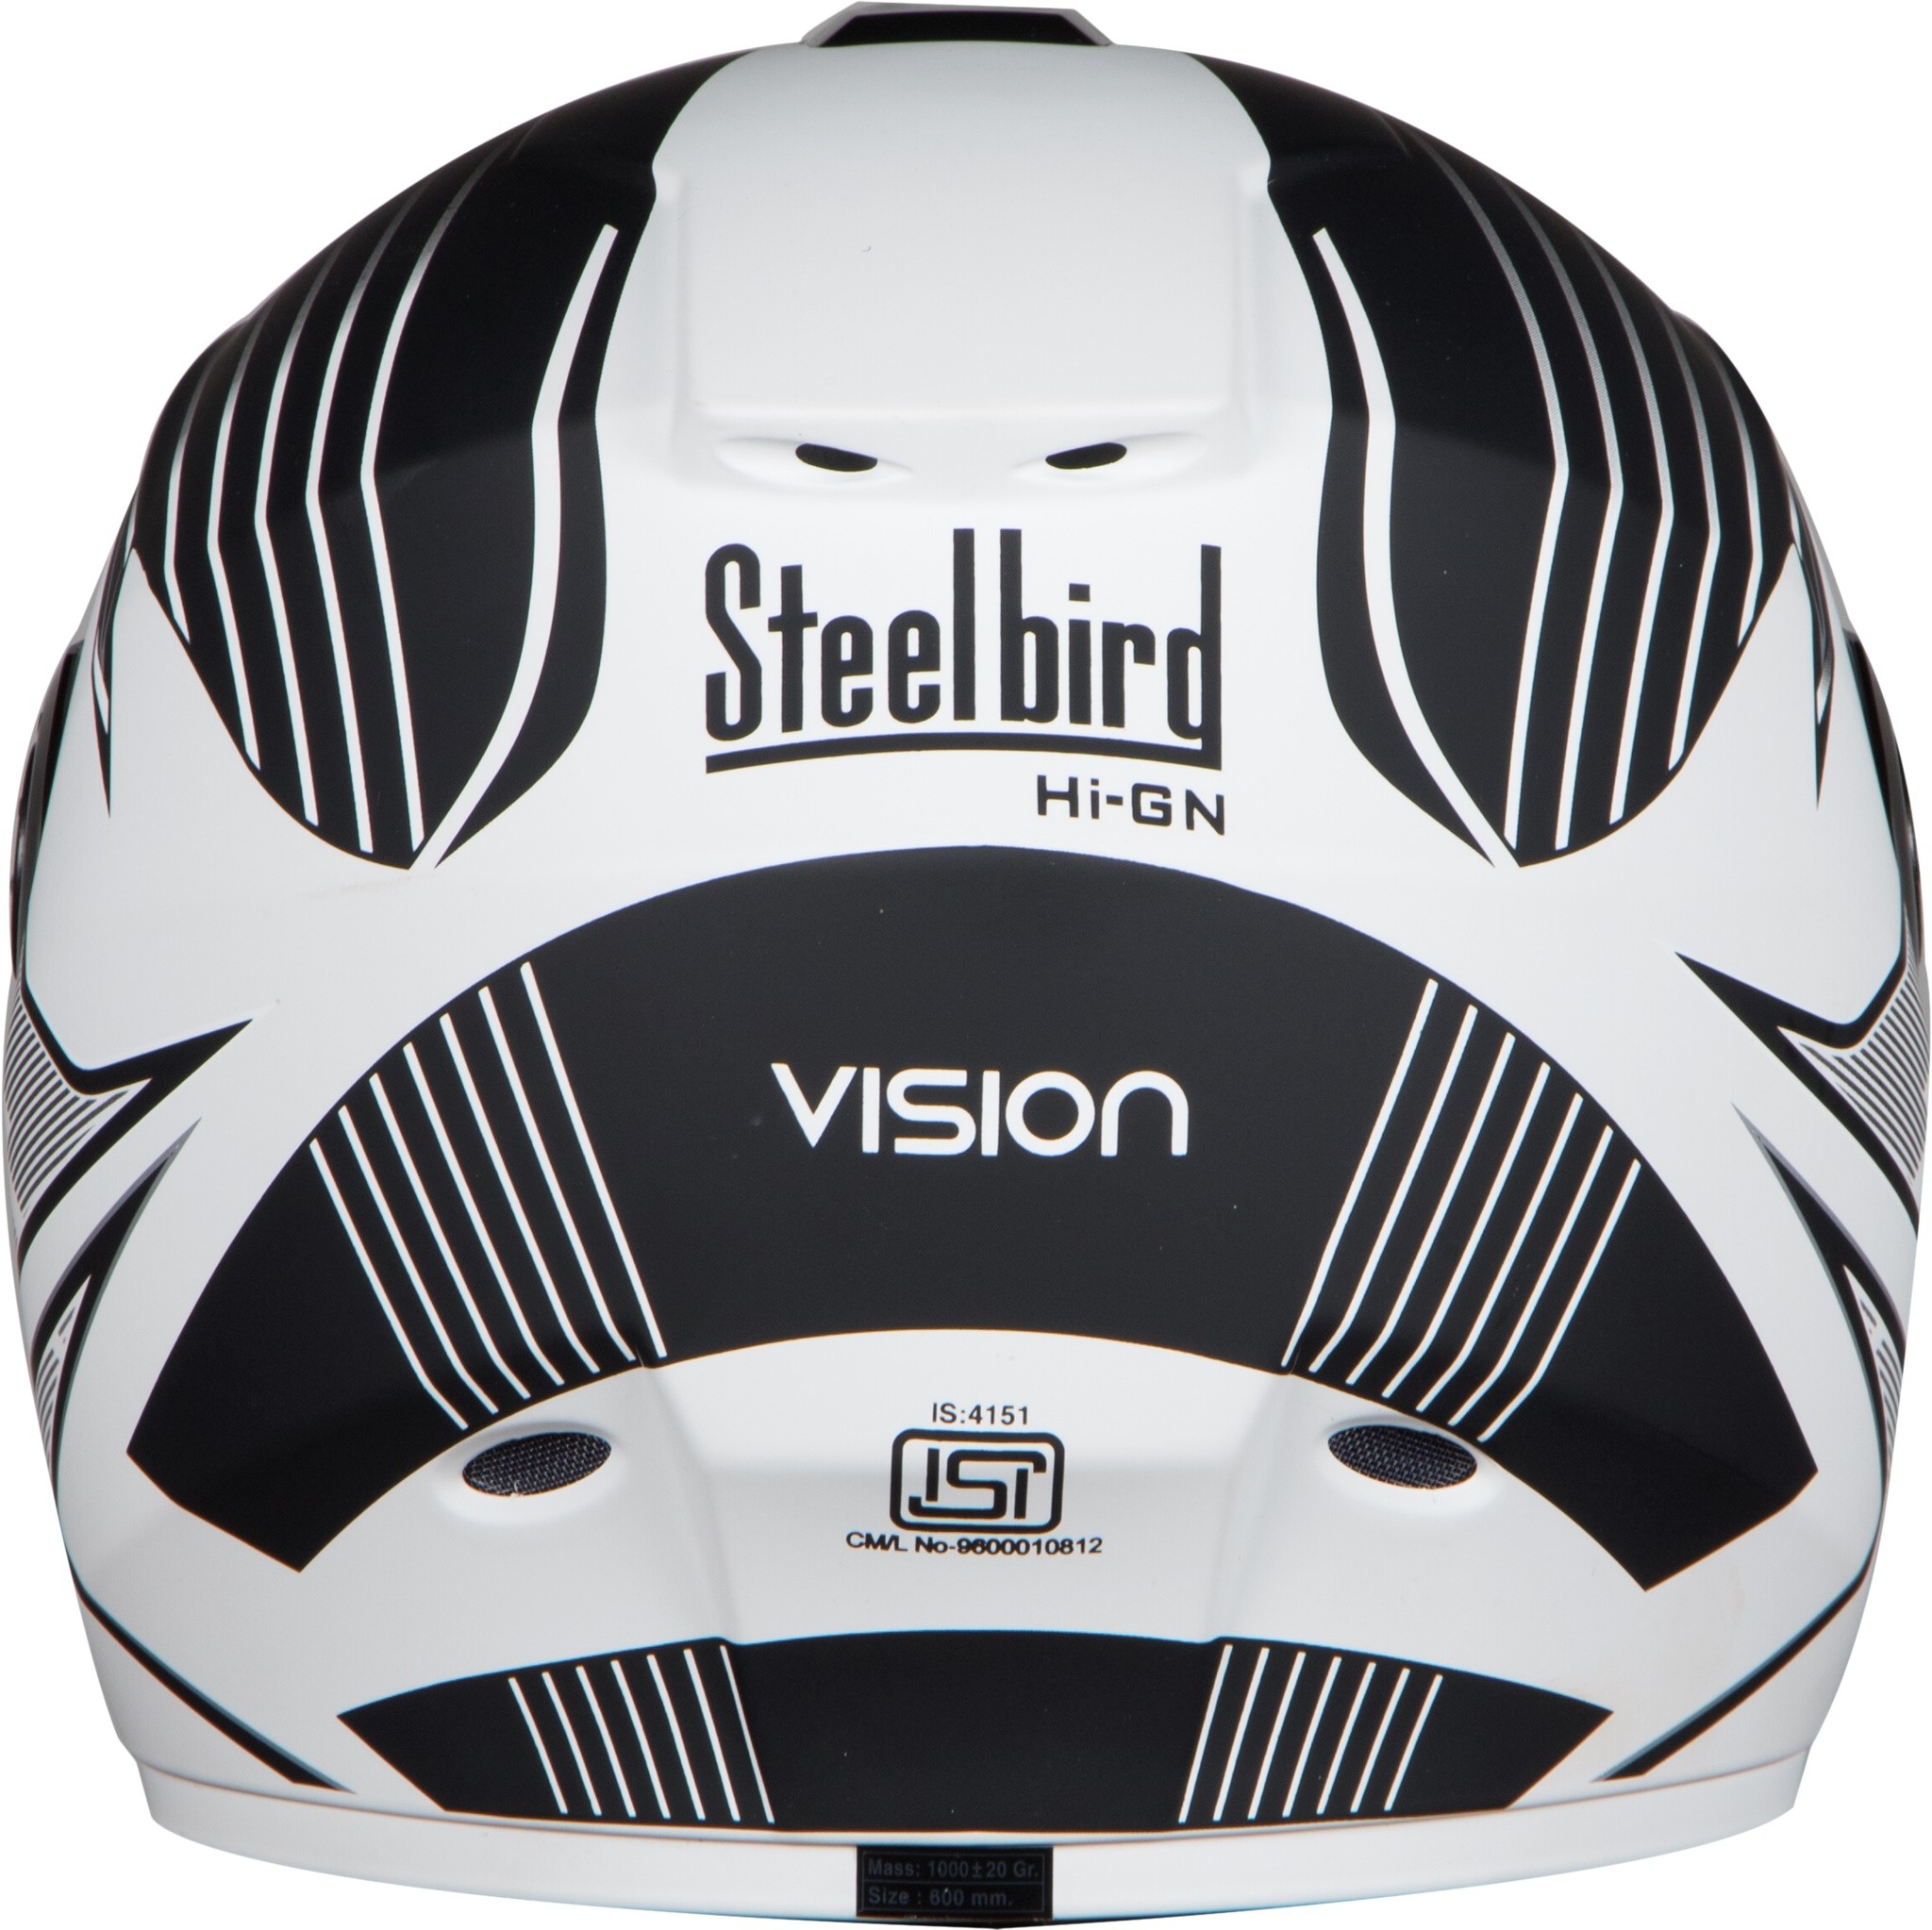 Steelbird HI-GN Men Vision Decal Attis Matt White ( Fitted With Clear Visor Extra Smoke Visor Free)